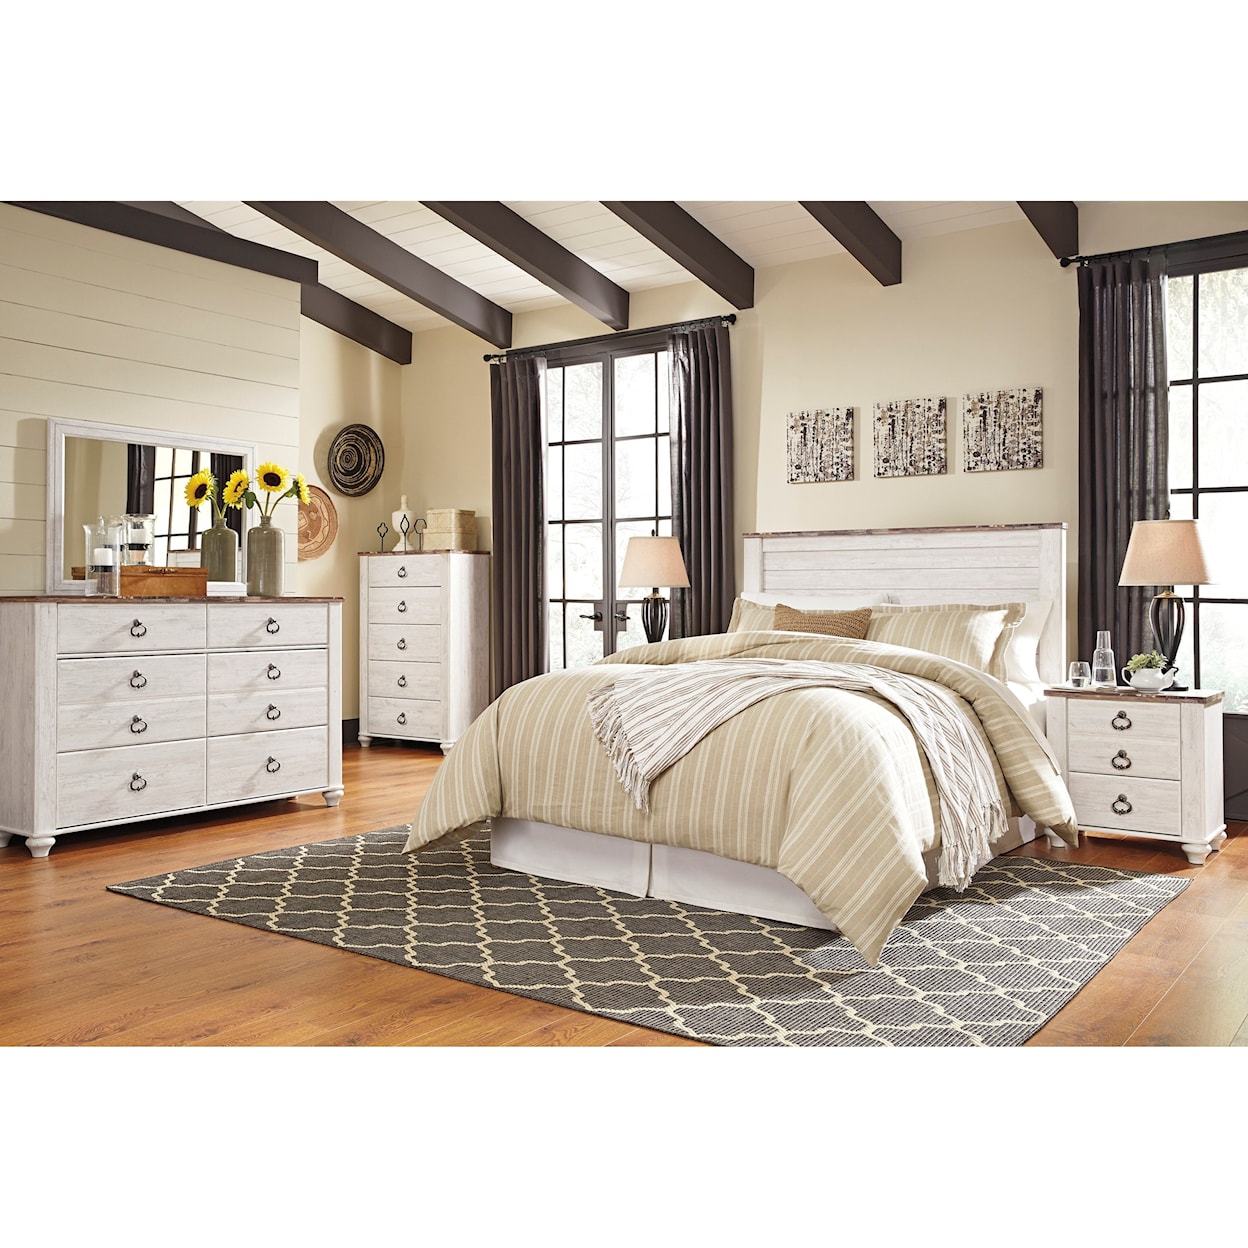 Signature Design by Ashley Furniture Willowton Queen/Full Bedroom Group